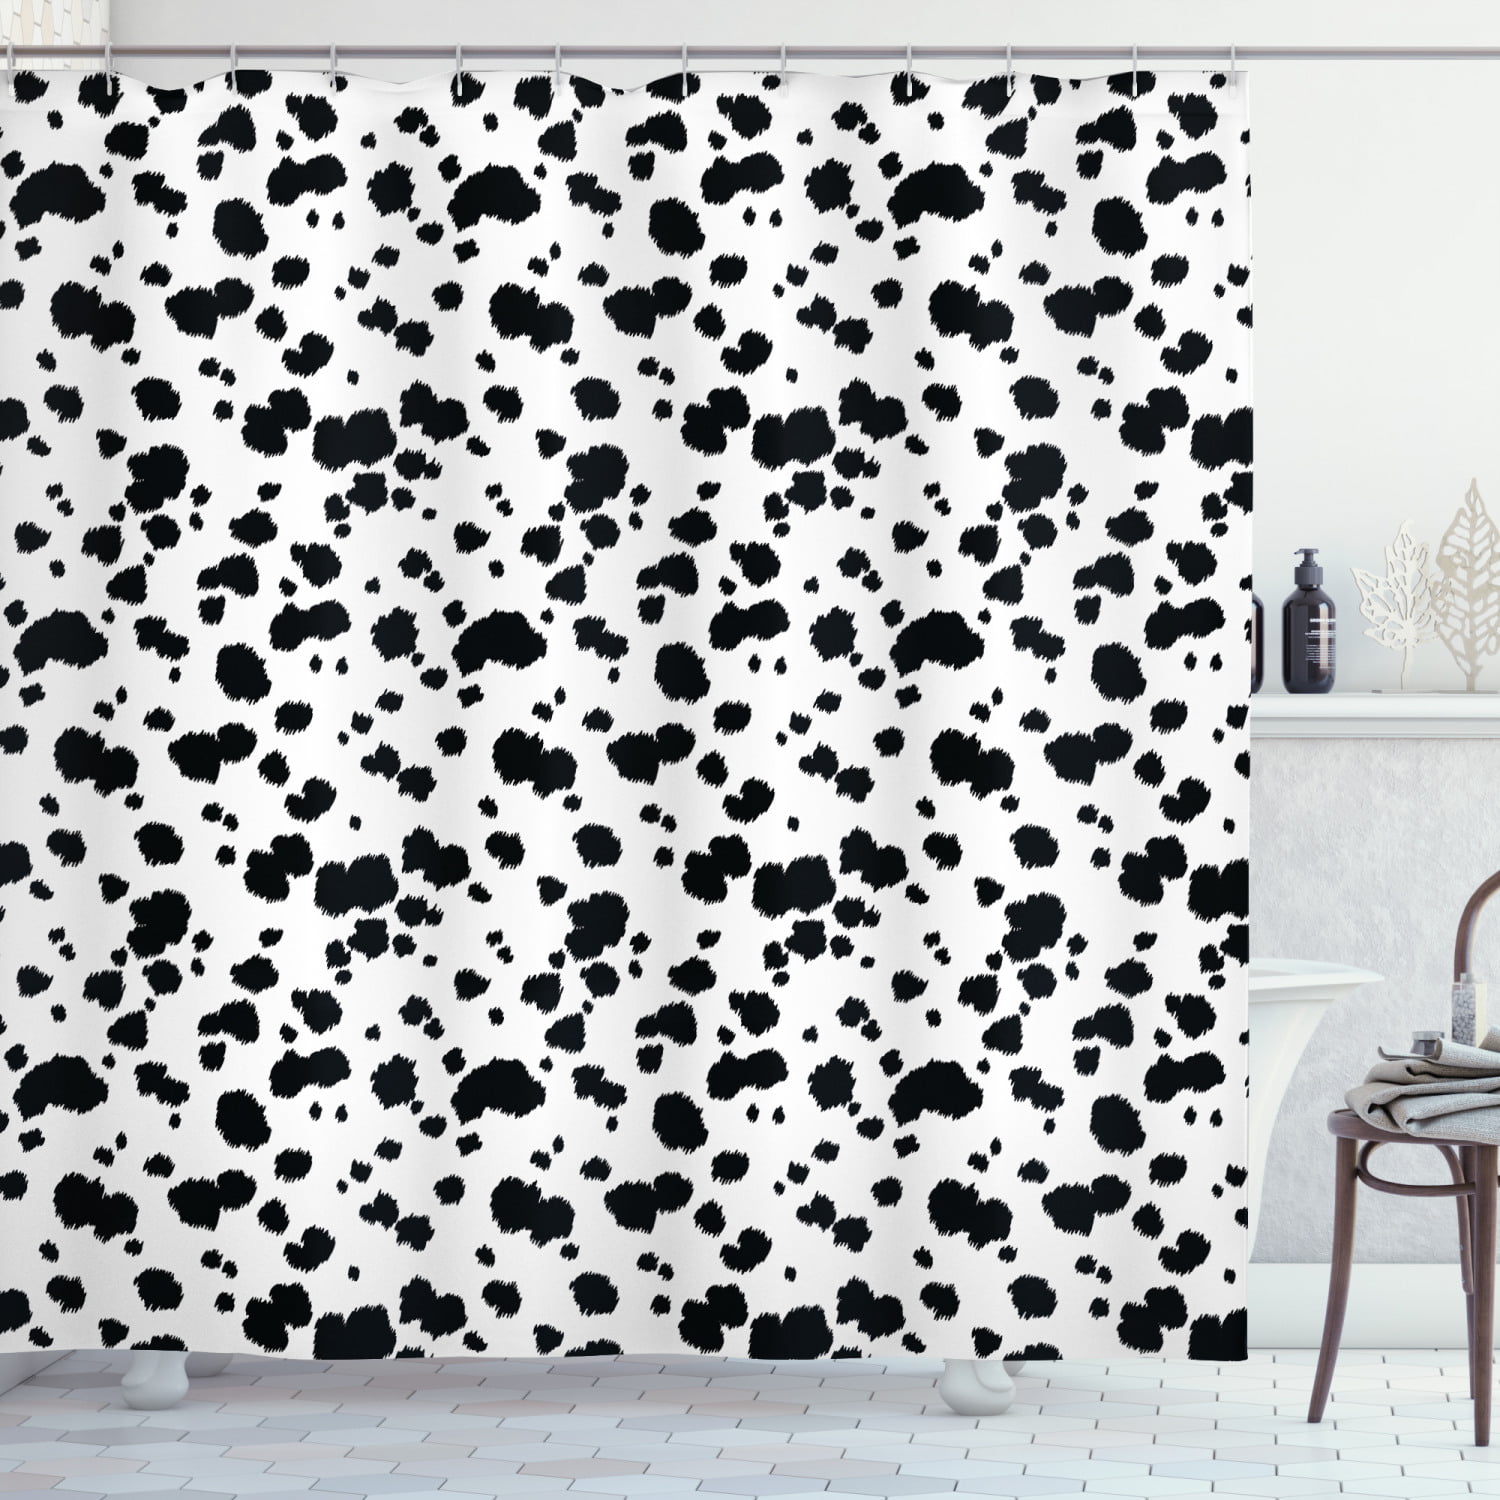 Details about   Dalmatian and Bone Shower Curtain Bathroom Decor Fabric & 12hooks 71 Inch